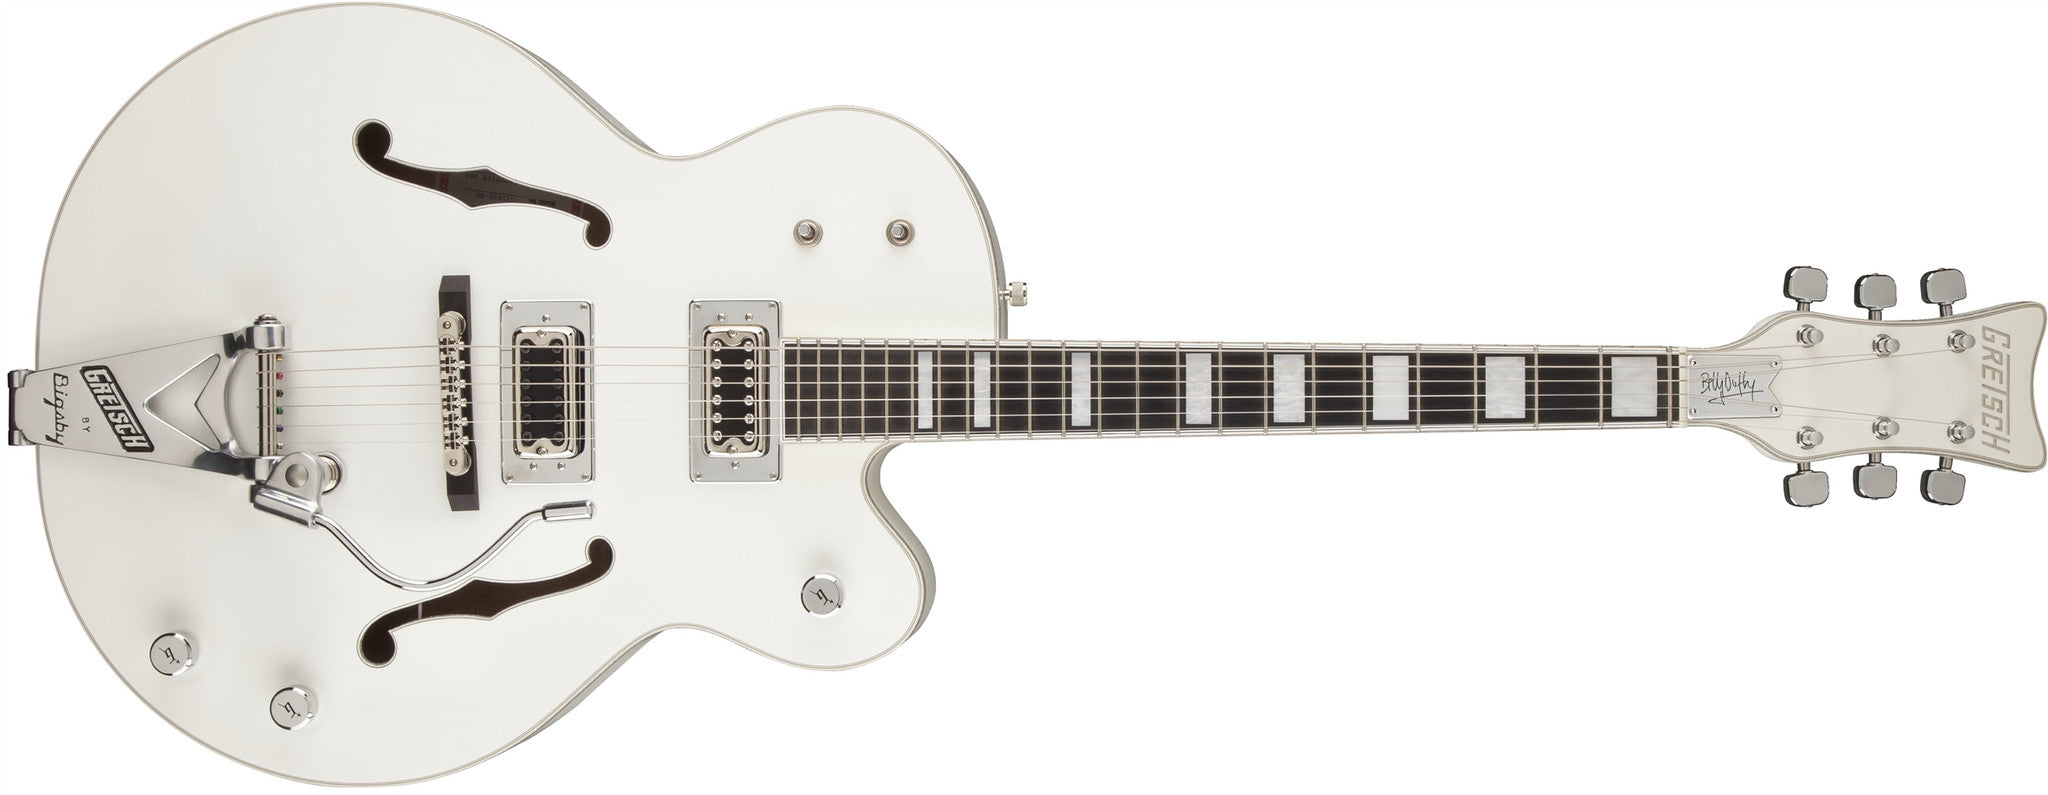 Gretsch G7593T Billy Duffy Signature Falcon with Bigsby, Ebony Fingerboard, White, Lacquer 2401409805 - L.A. Music - Canada's Favourite Music Store!